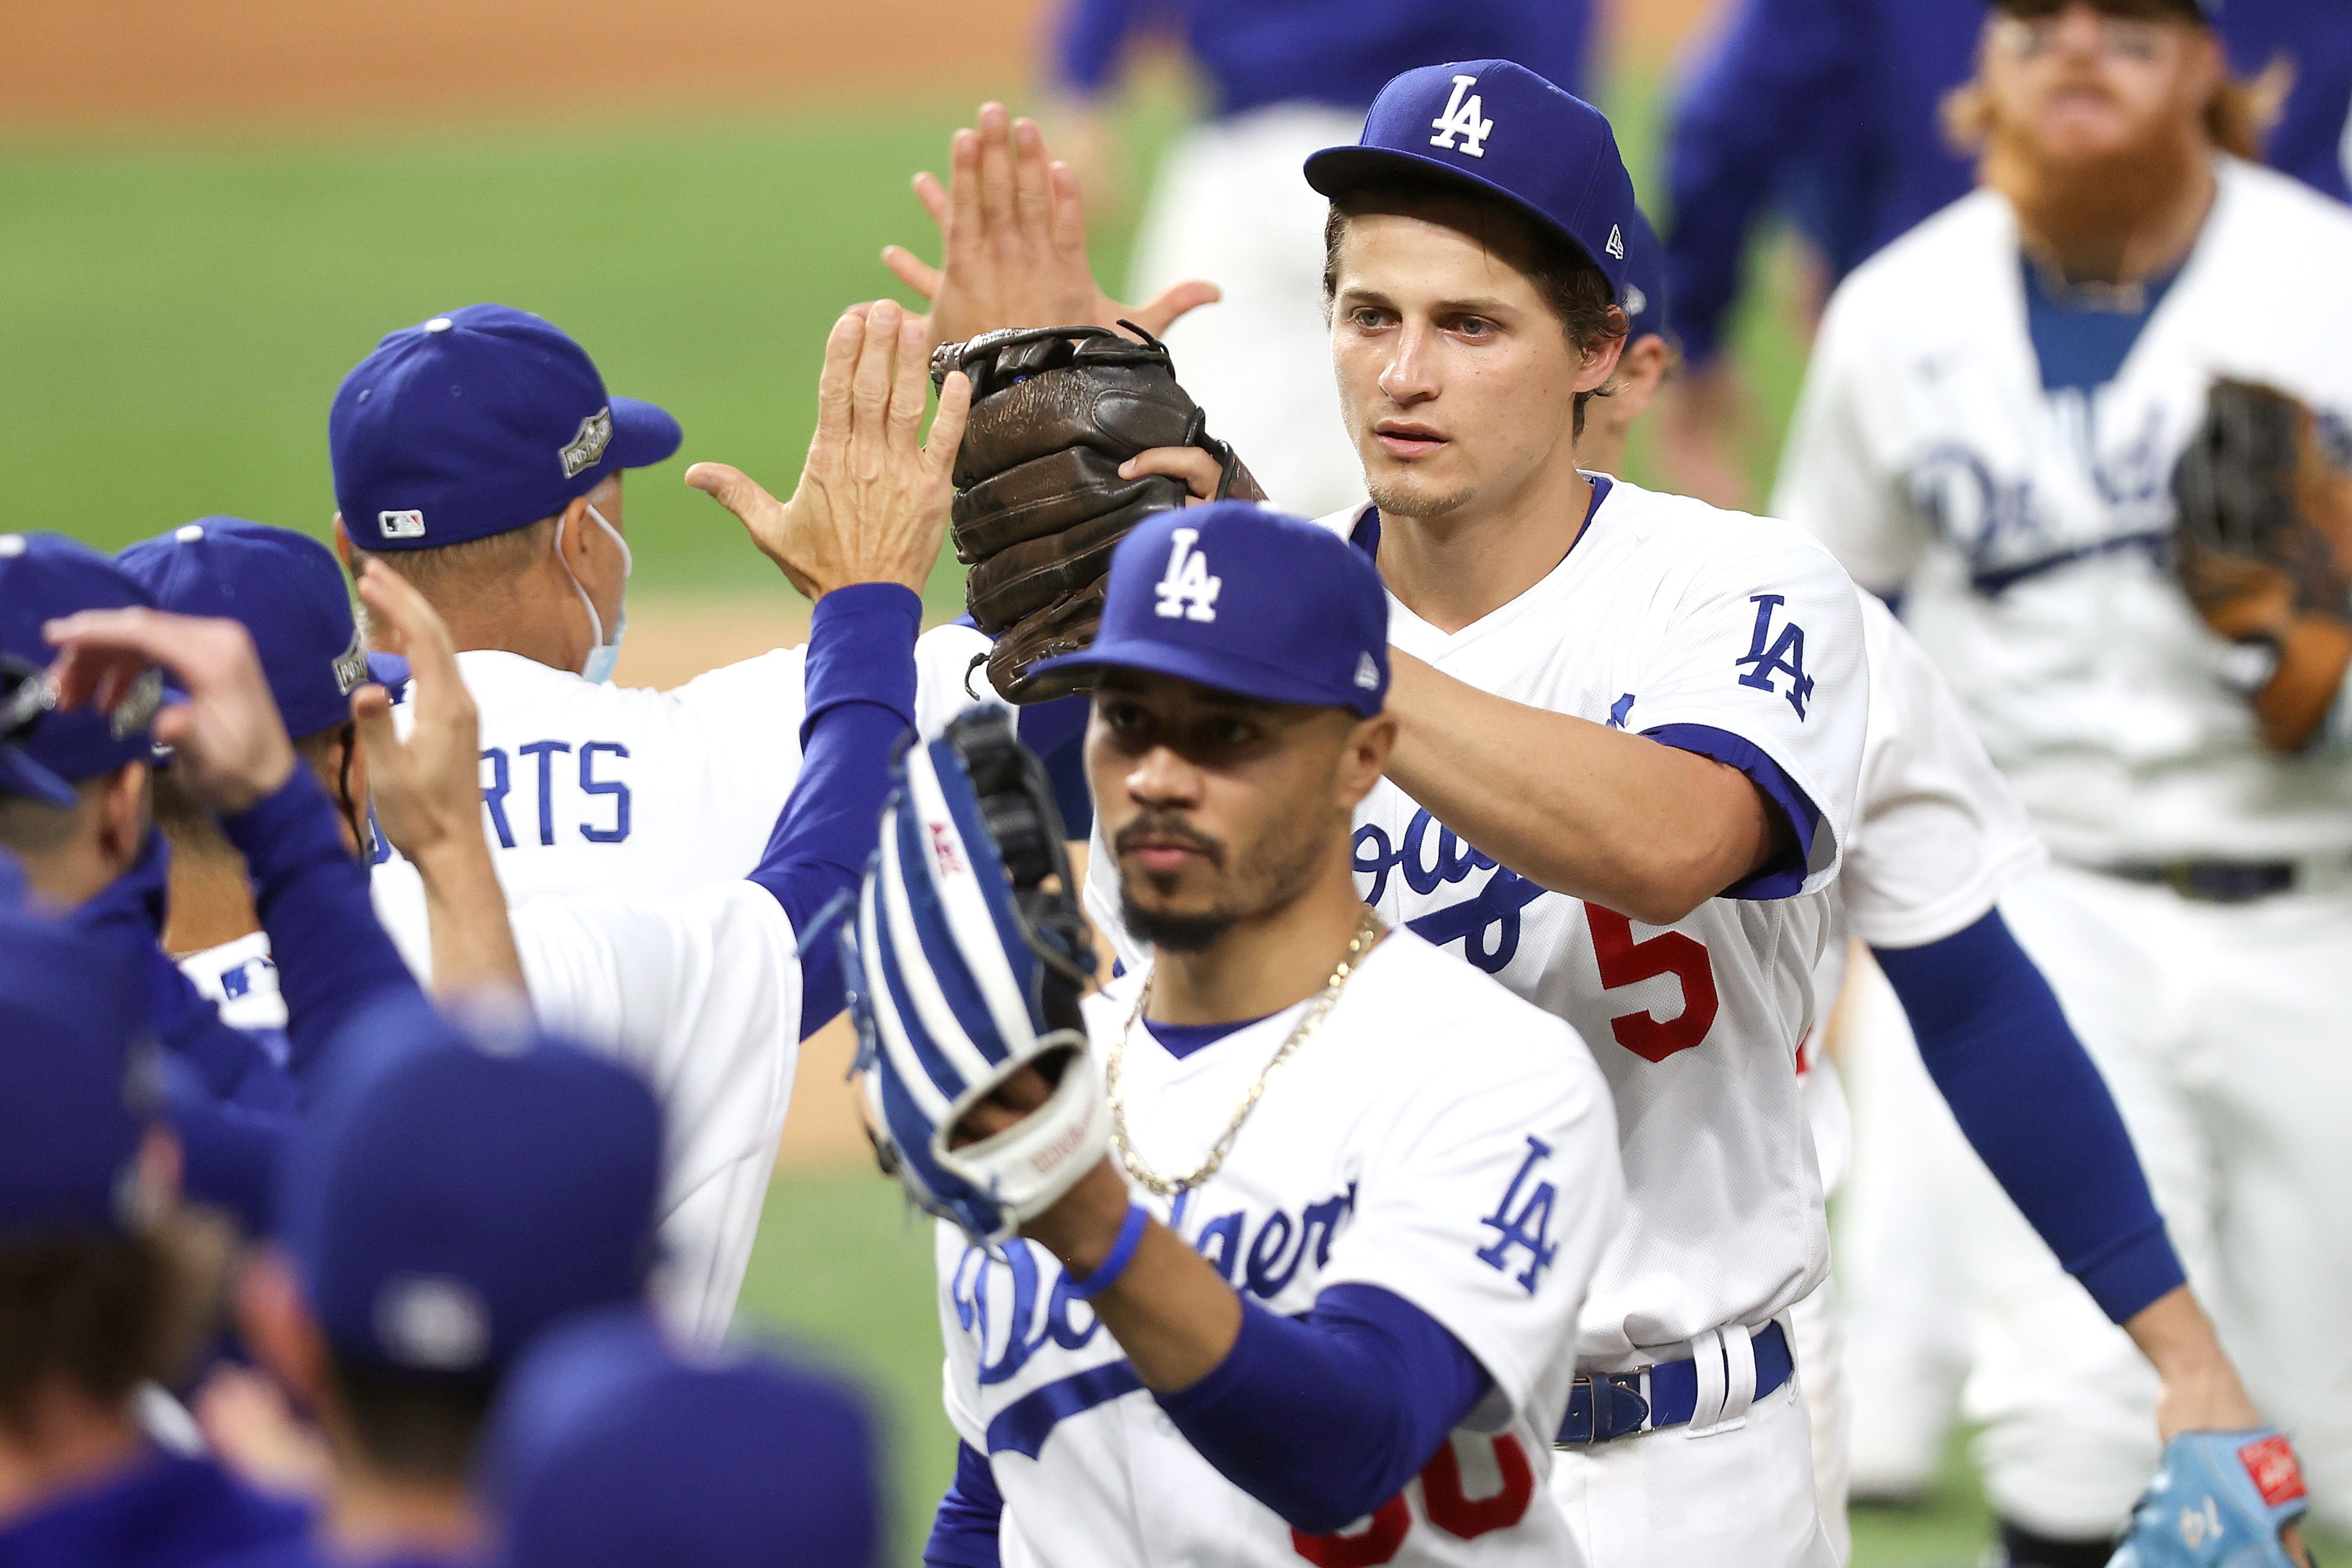 Tony Gonsolin injury: Dodgers starter taking 'slow process' after